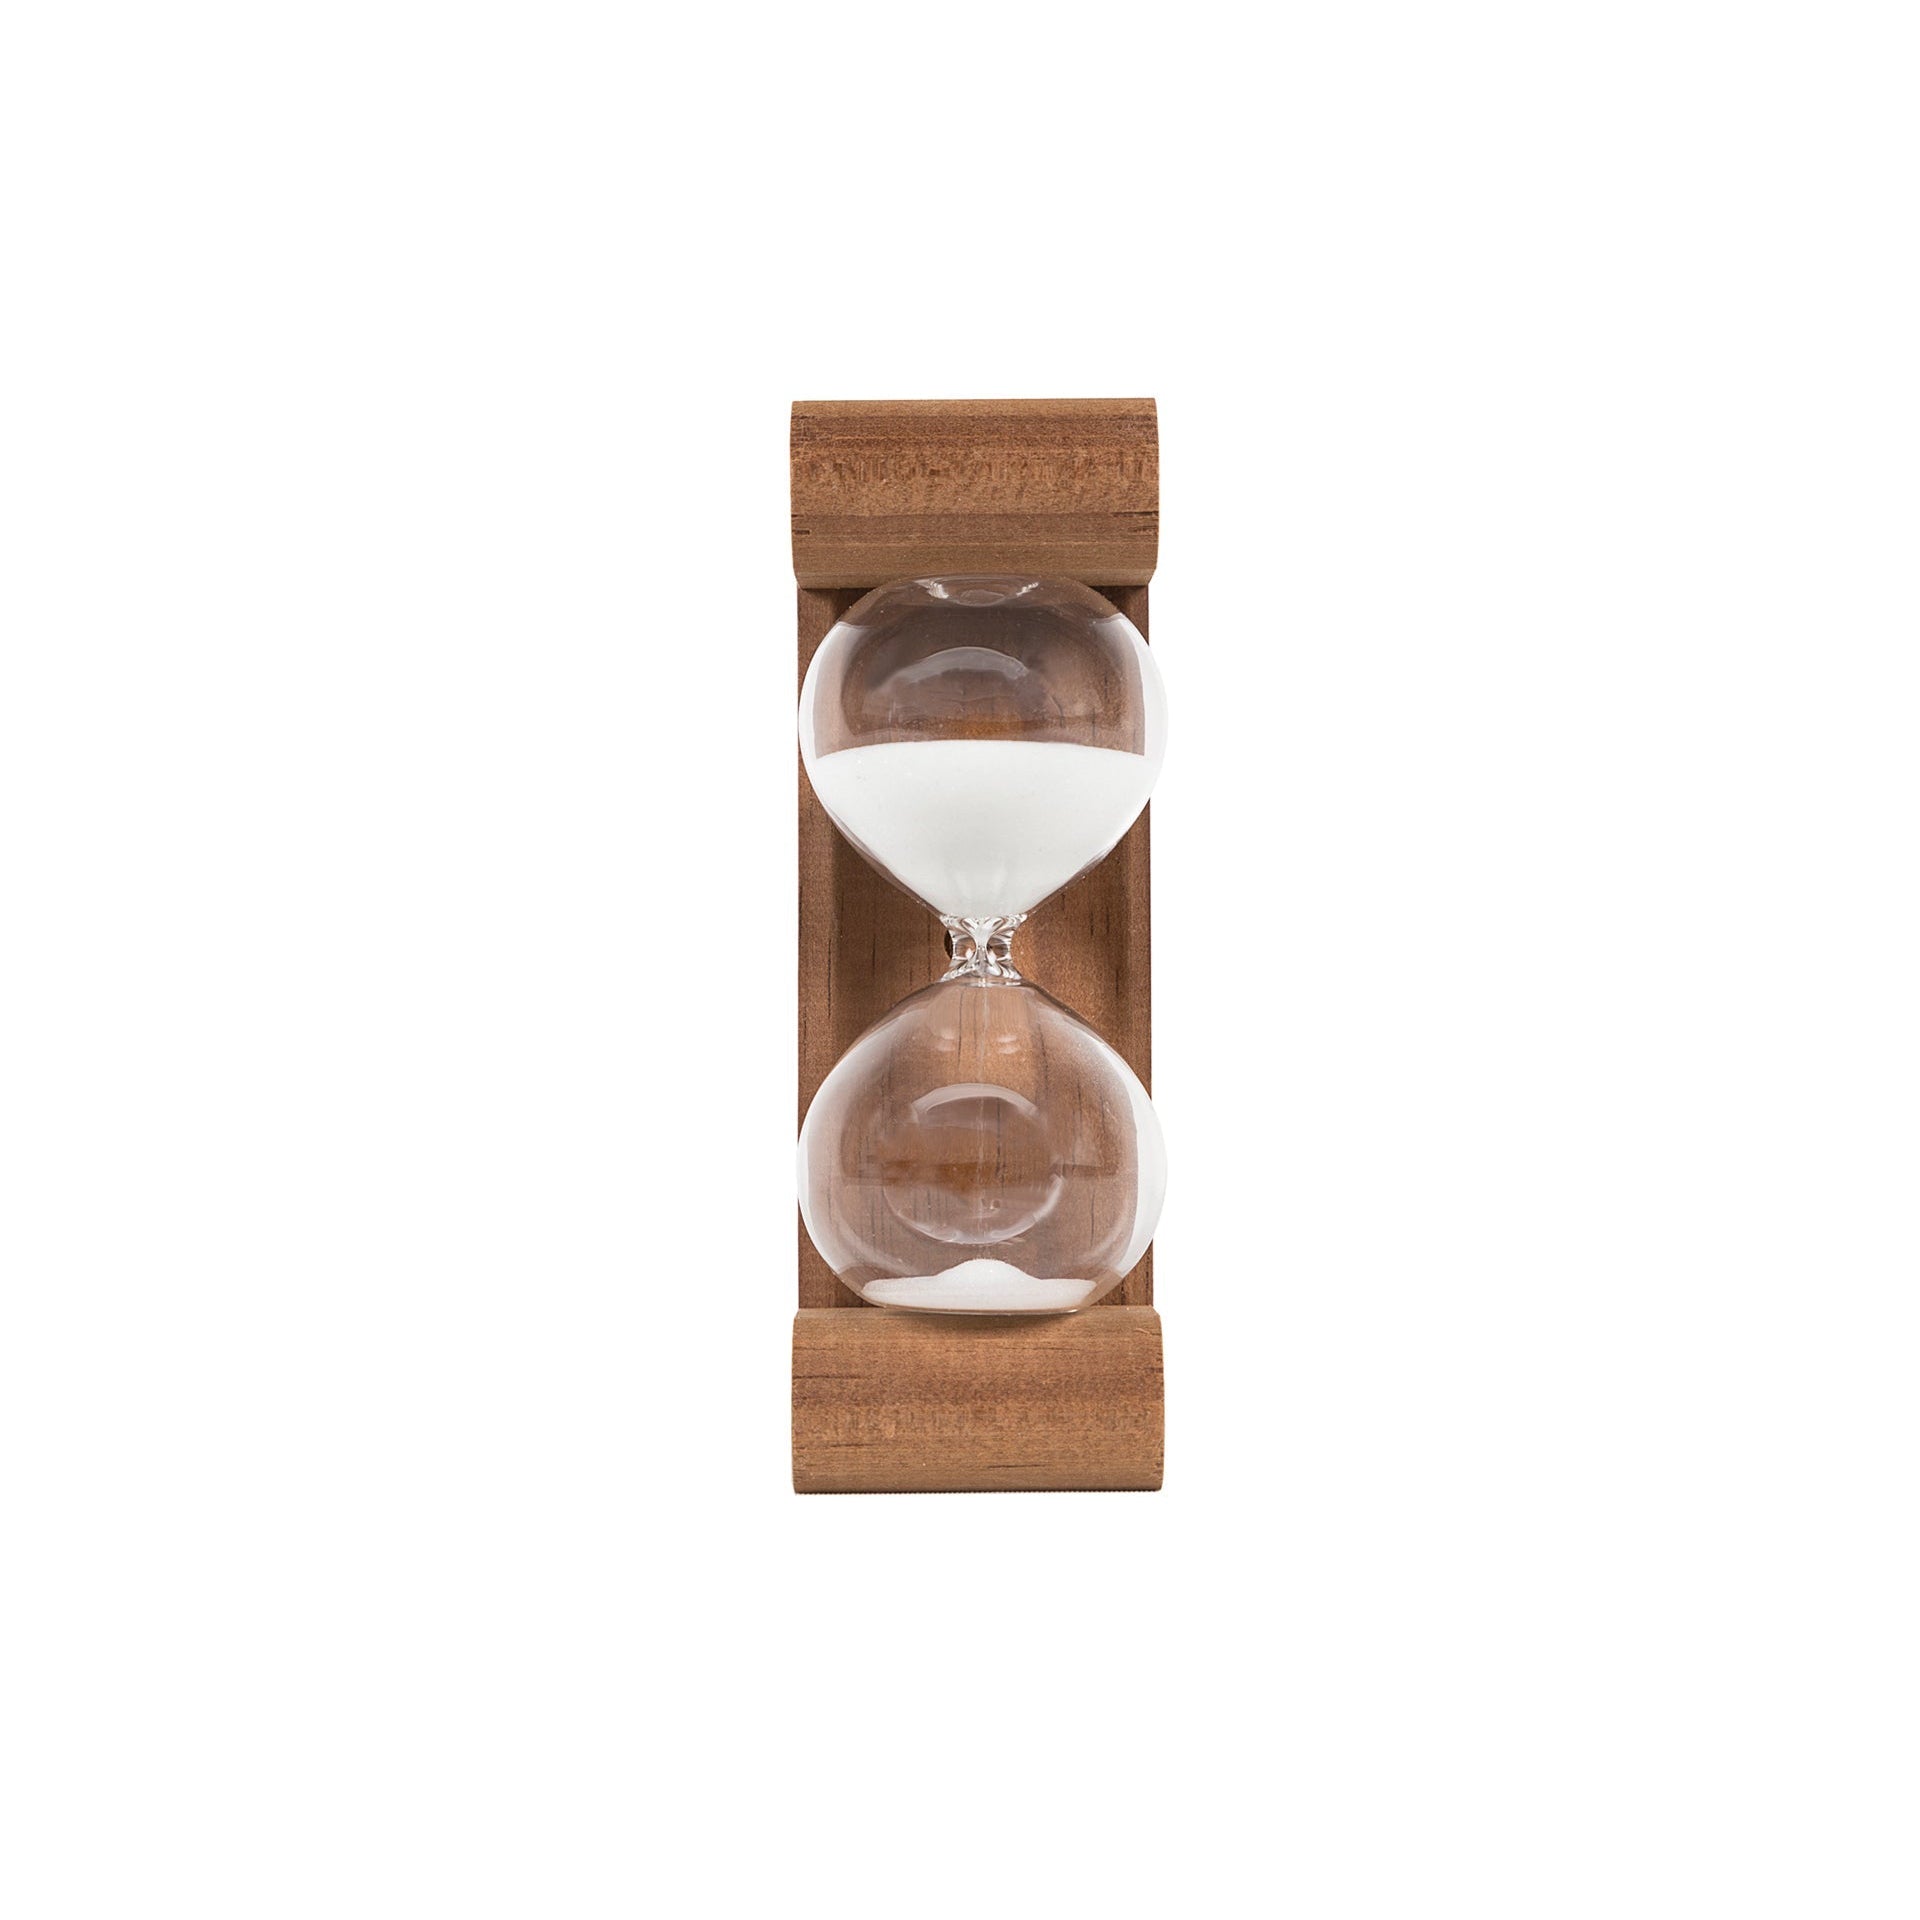 Sauna Sand Timer - Purely Relaxation